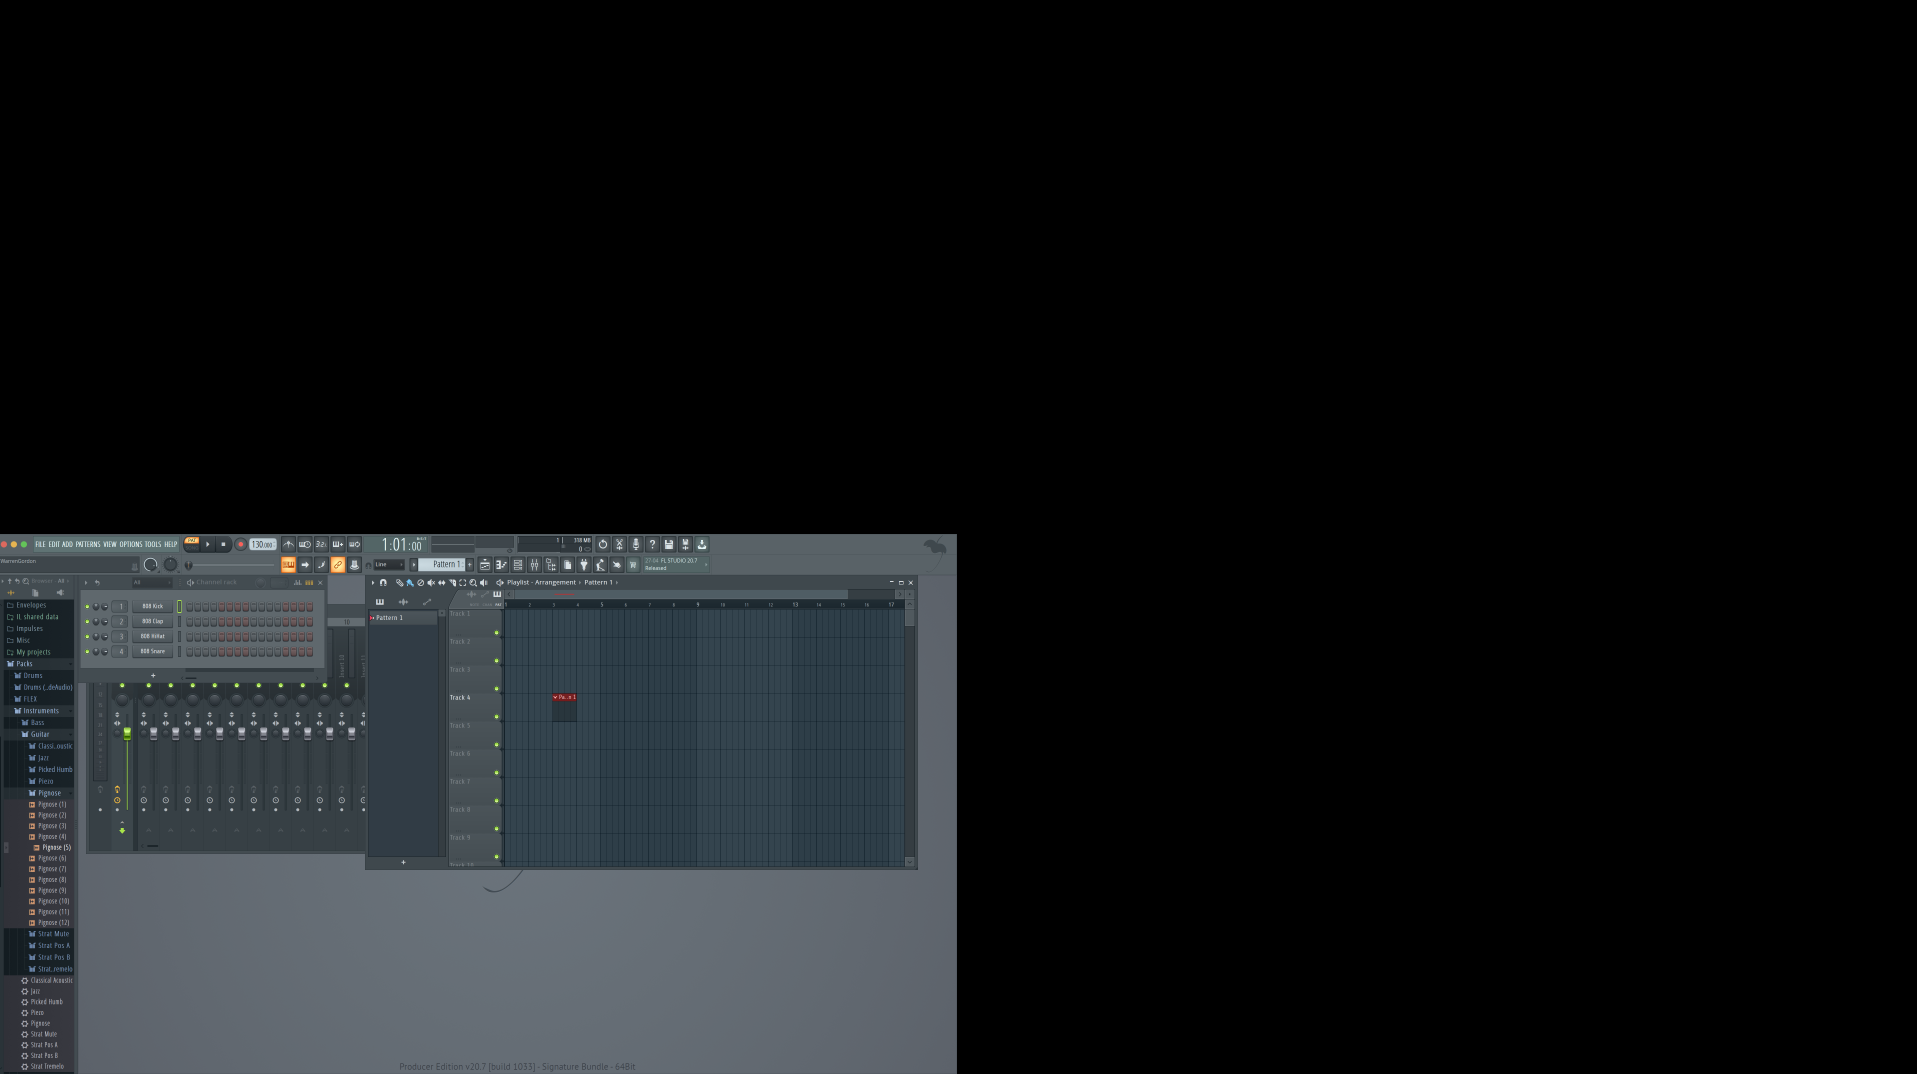 First day on Mac FL Studio.. I can't figure out how to delete